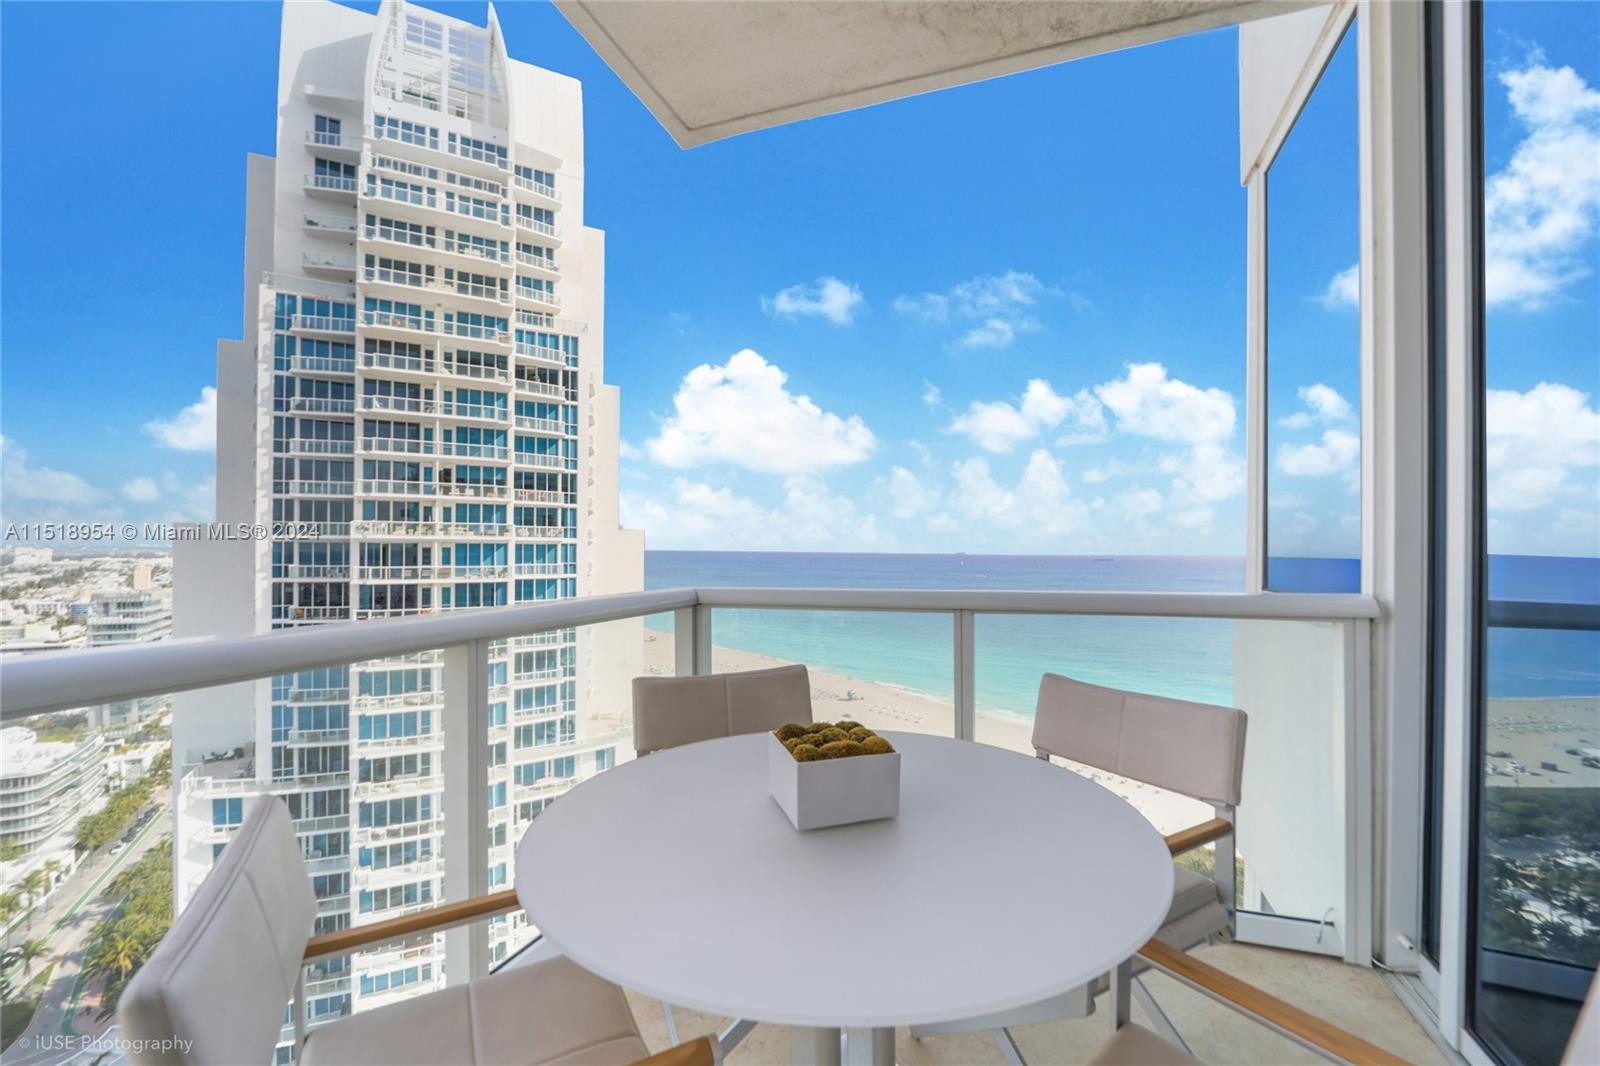 Unit 2509 features 2,122 sqft of living area, 3 bedrooms (2+ enclosed den) and 3 full bathrooms, amazing views of the ocean, Miami Beach and Miami skyline. Apartment is fully furnished. Continuum South Beach offers Resort Style Living with the best amenities in South Beach including 2 lagoon pools, 1 lap pool, 3 story health club Equinox style, 3 tennis courts on clay, beach service, private patio restaurant and more!